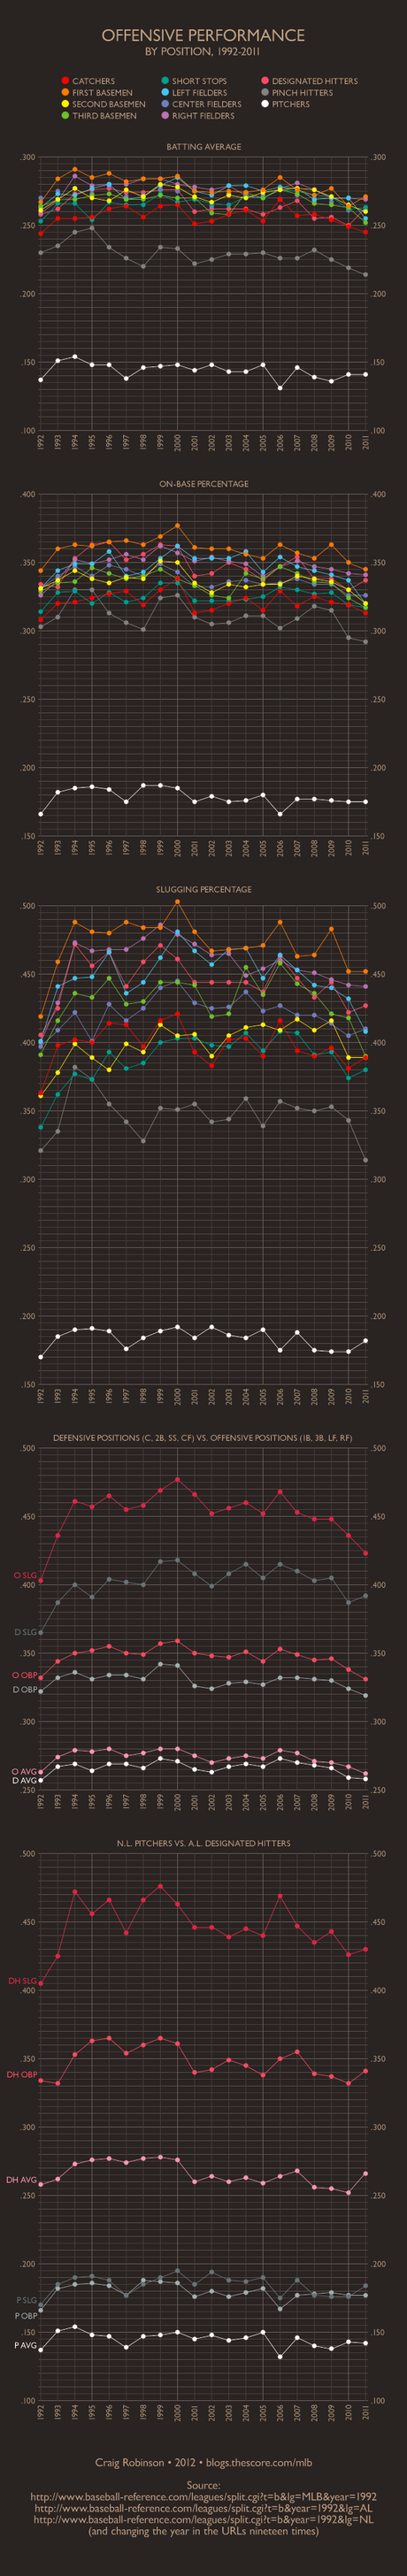 Infographic: MLB Offensive Performance by Position, 1992-2011